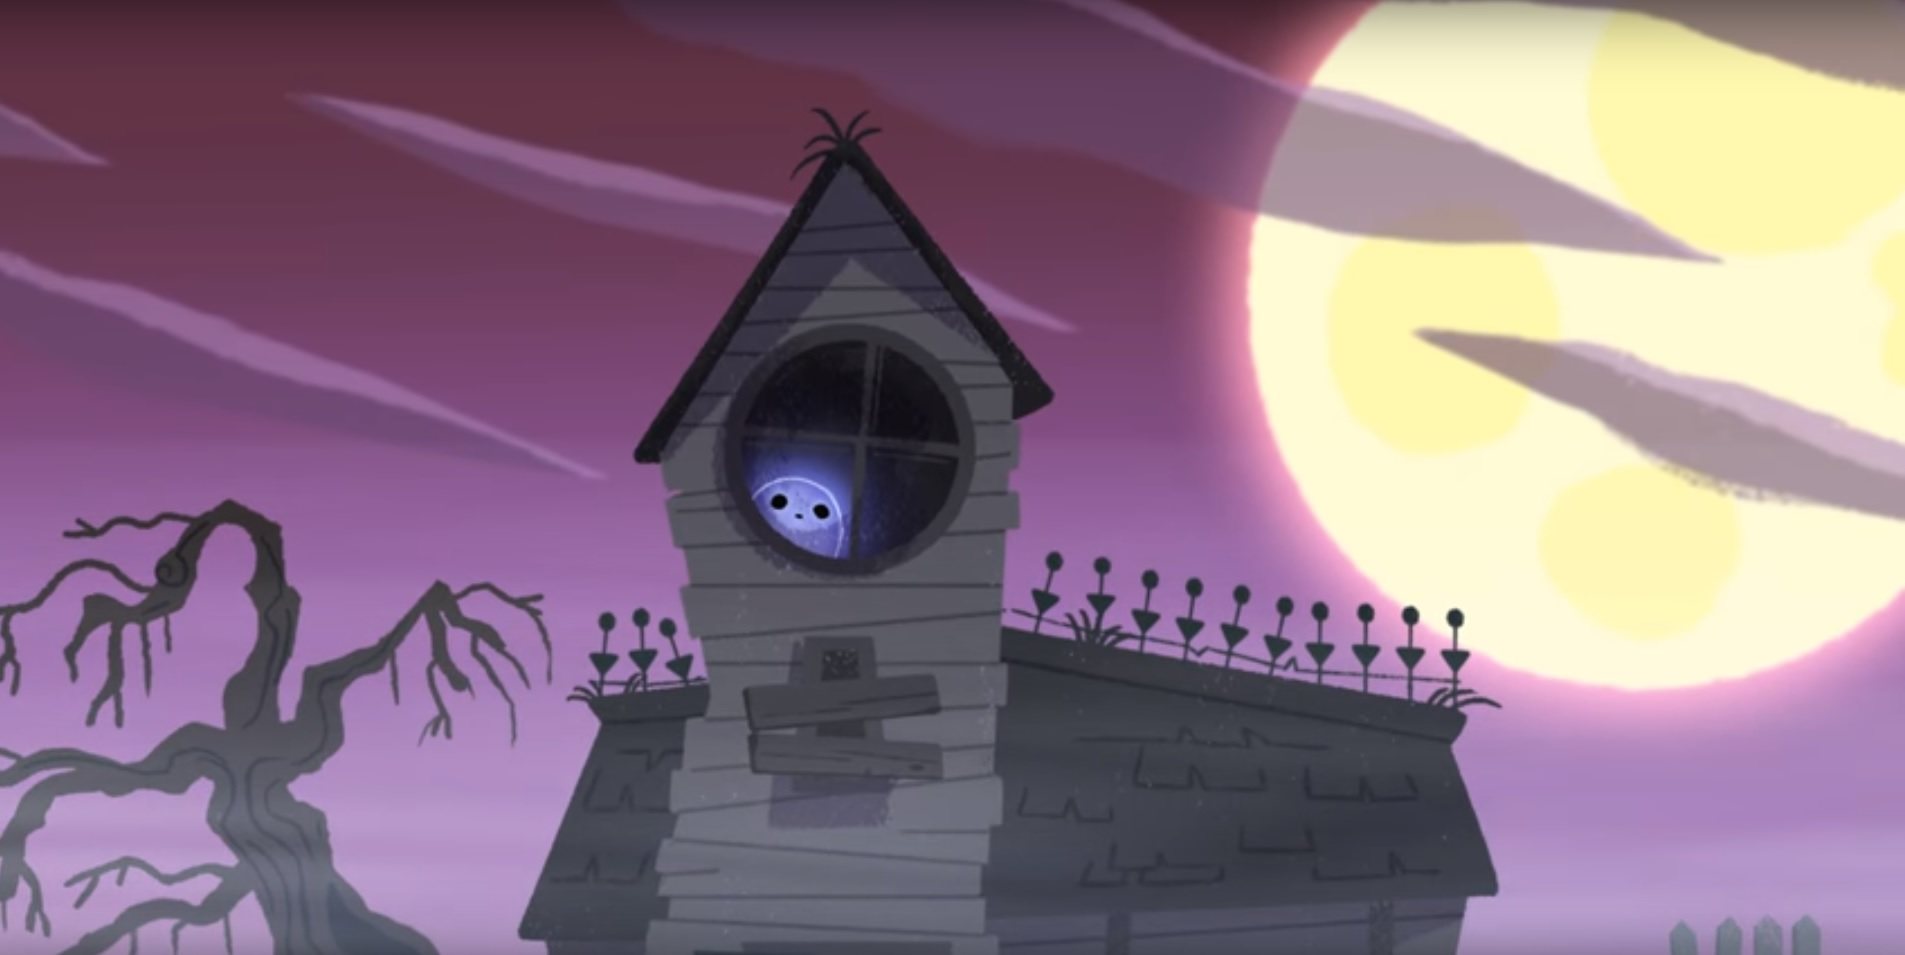 Google Doodle S 17 Halloween Video Follows Jinx The Lonely Ghost On His Quest For The Perfect Halloween Costume